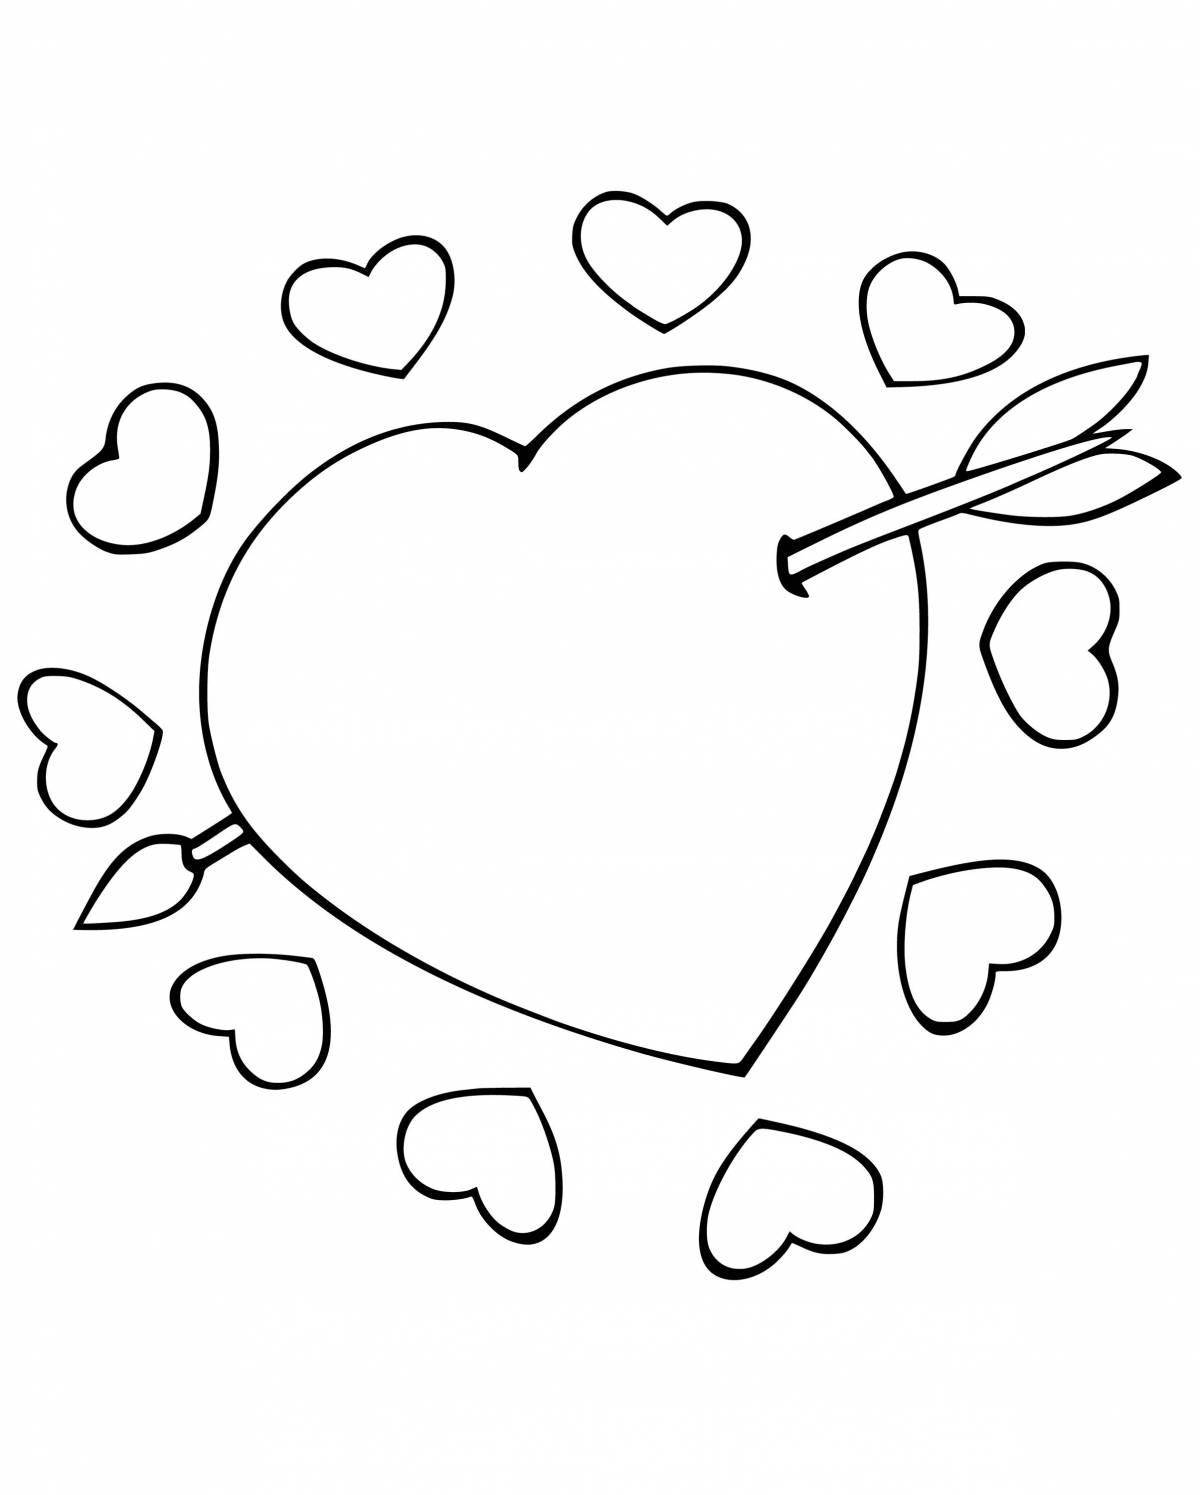 Coloring book glowing little heart